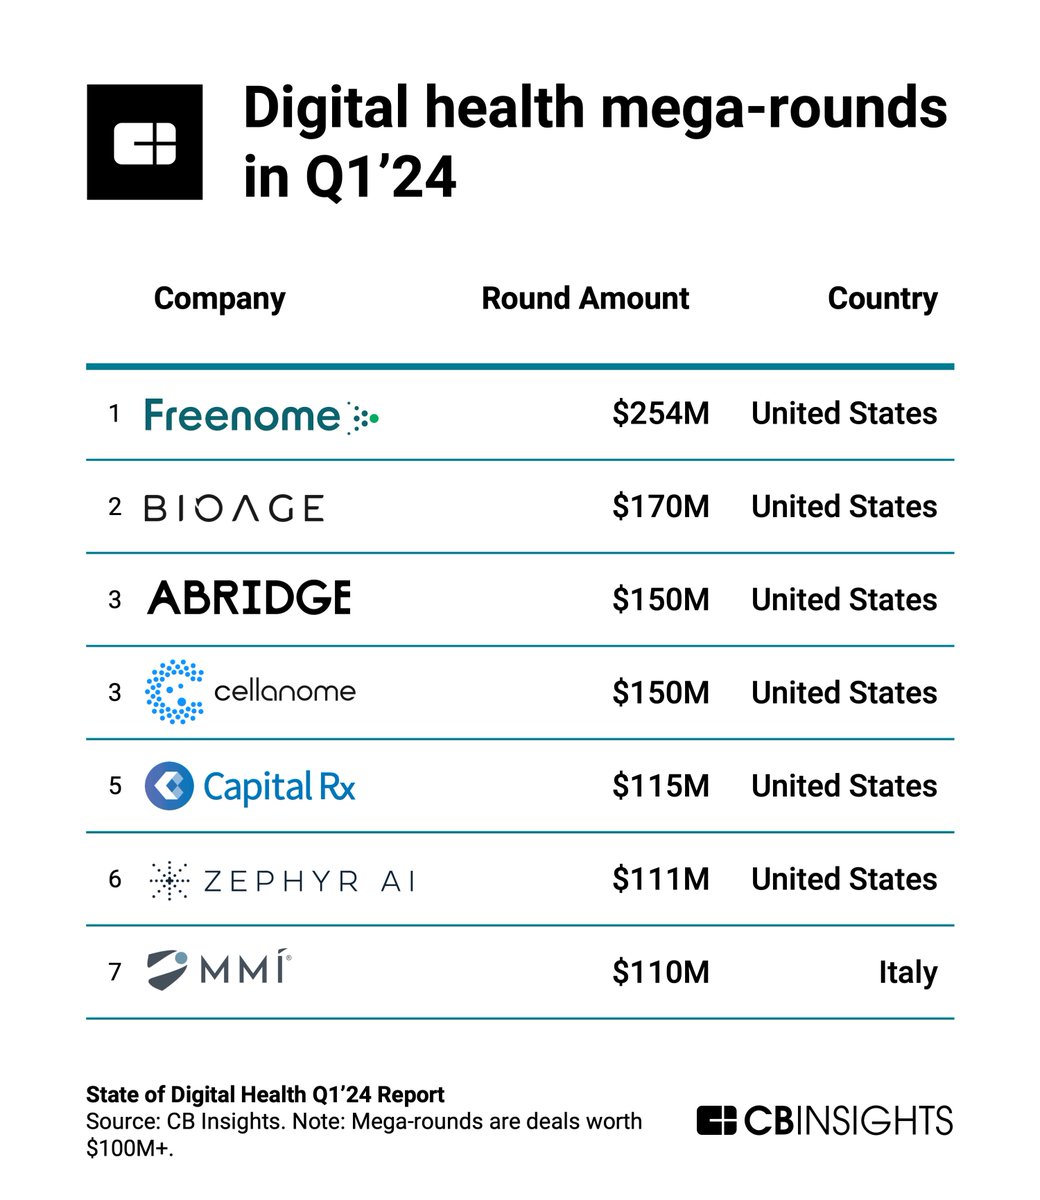 Last quarter, digital health dealmaking continued to trend down from 2021, though there were 7 mega-rounds (deals worth $100M+). And to nobody’s surprise, AI was a common theme among the top deals. Dive into investment trends in the US and beyond here: cbi.team/3y5x7vT